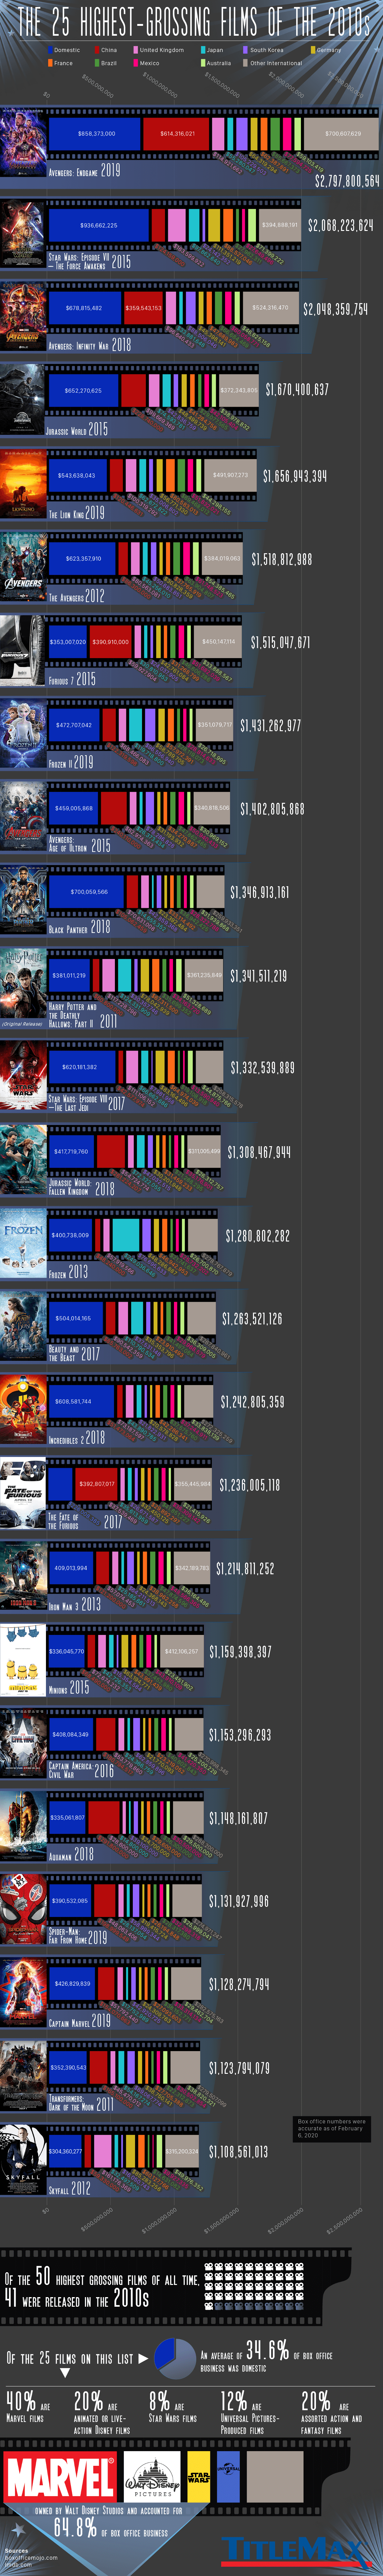 The 25 HighestGrossing Films of the 2010s TitleMax